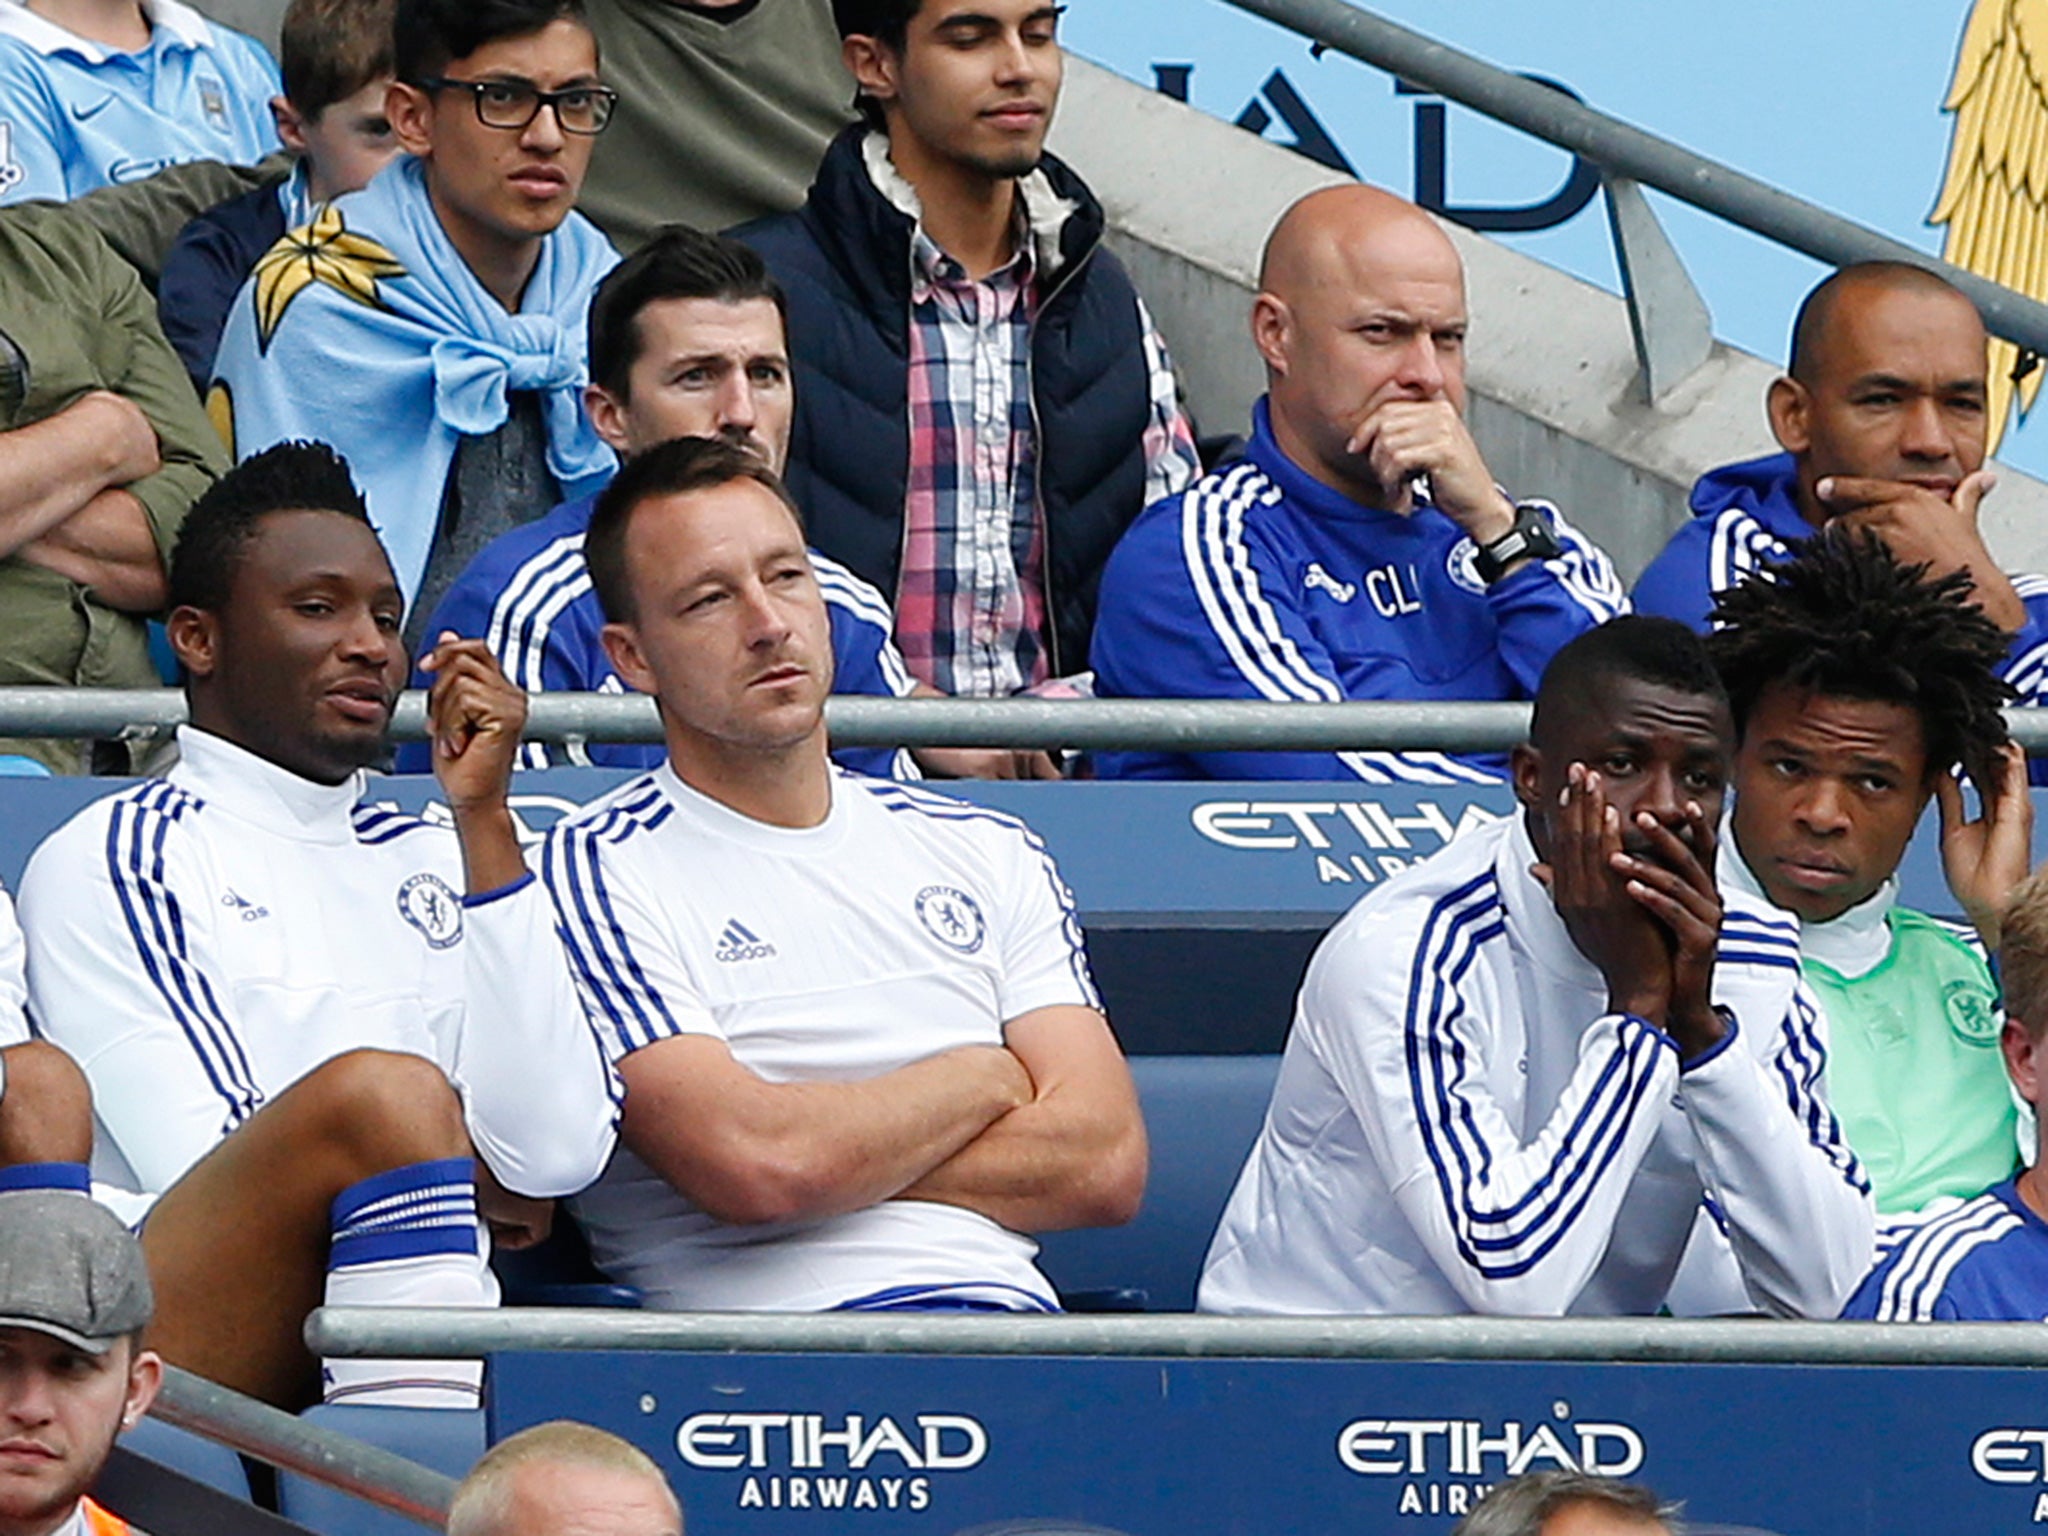 John Terry on the bench after being substituted against Manchester City last weekend